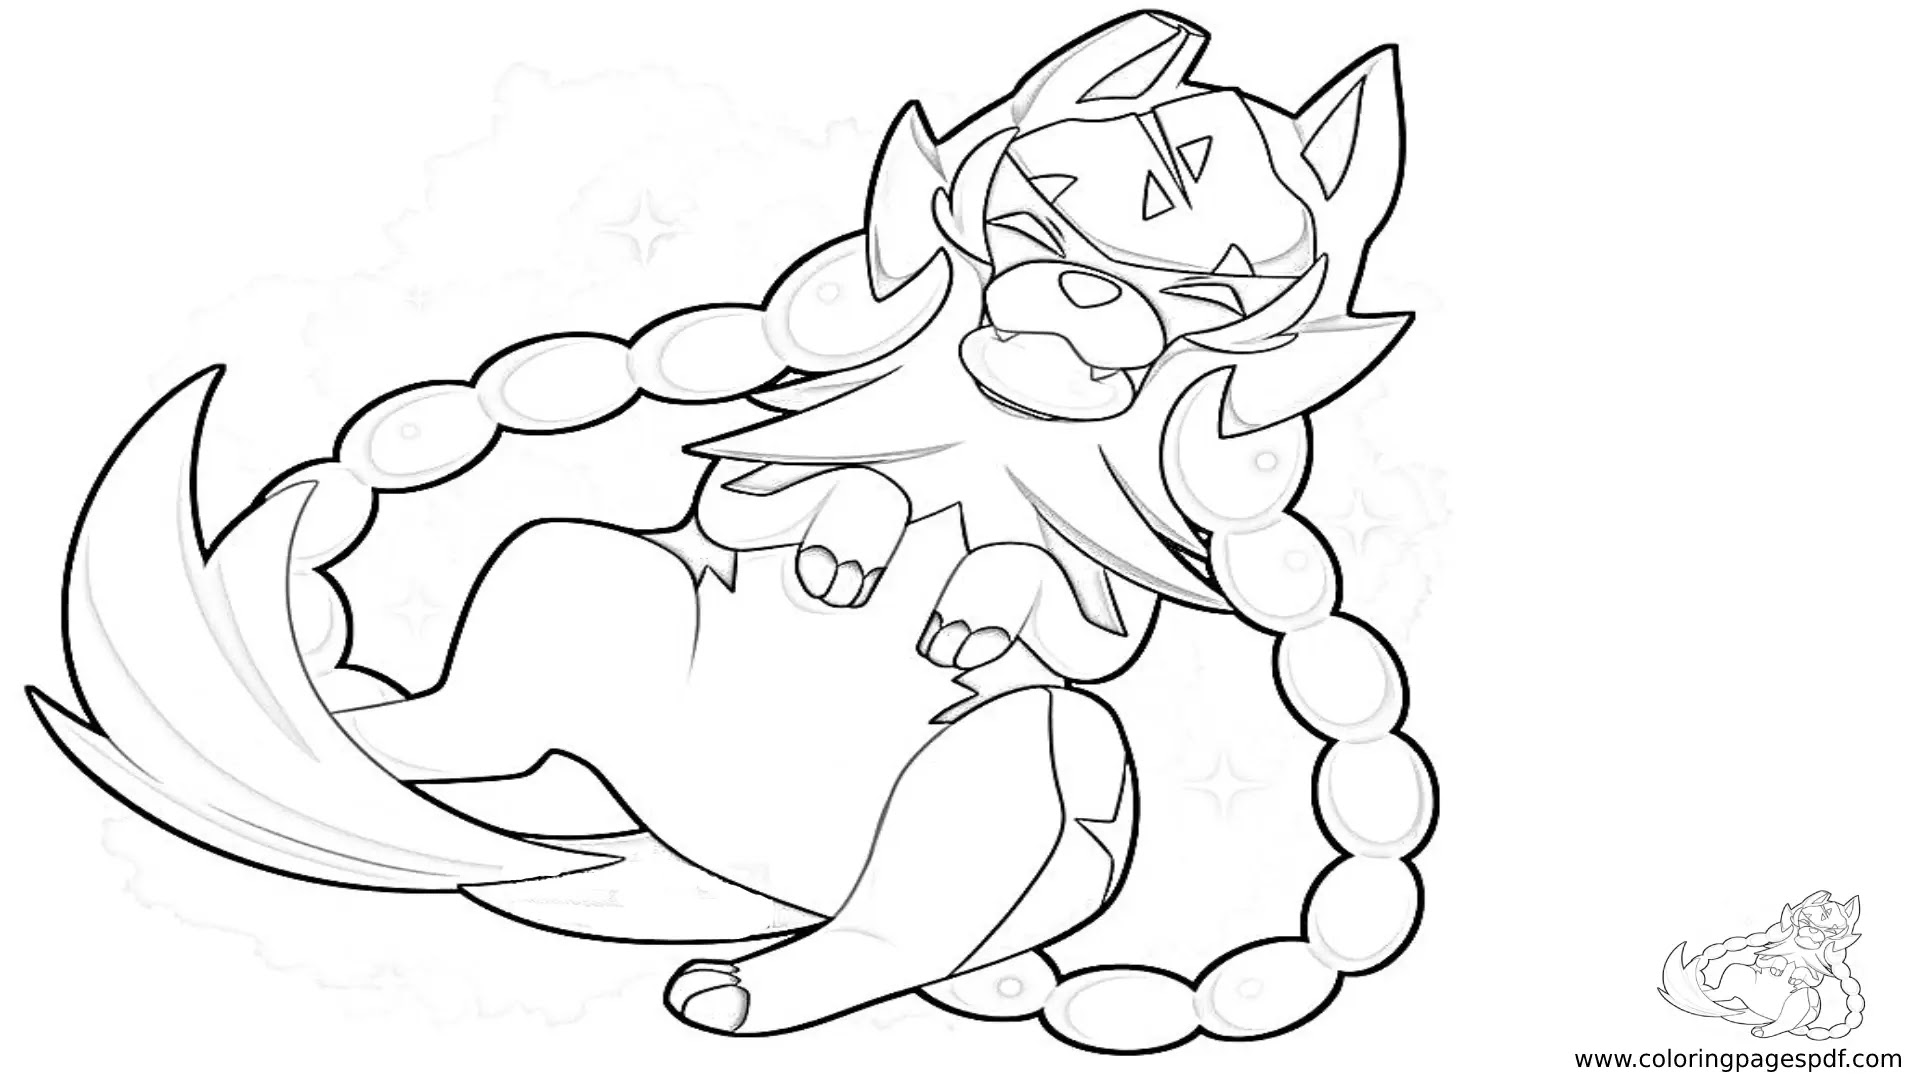 Coloring Page Of A Cute Zacian Laying On Its Back